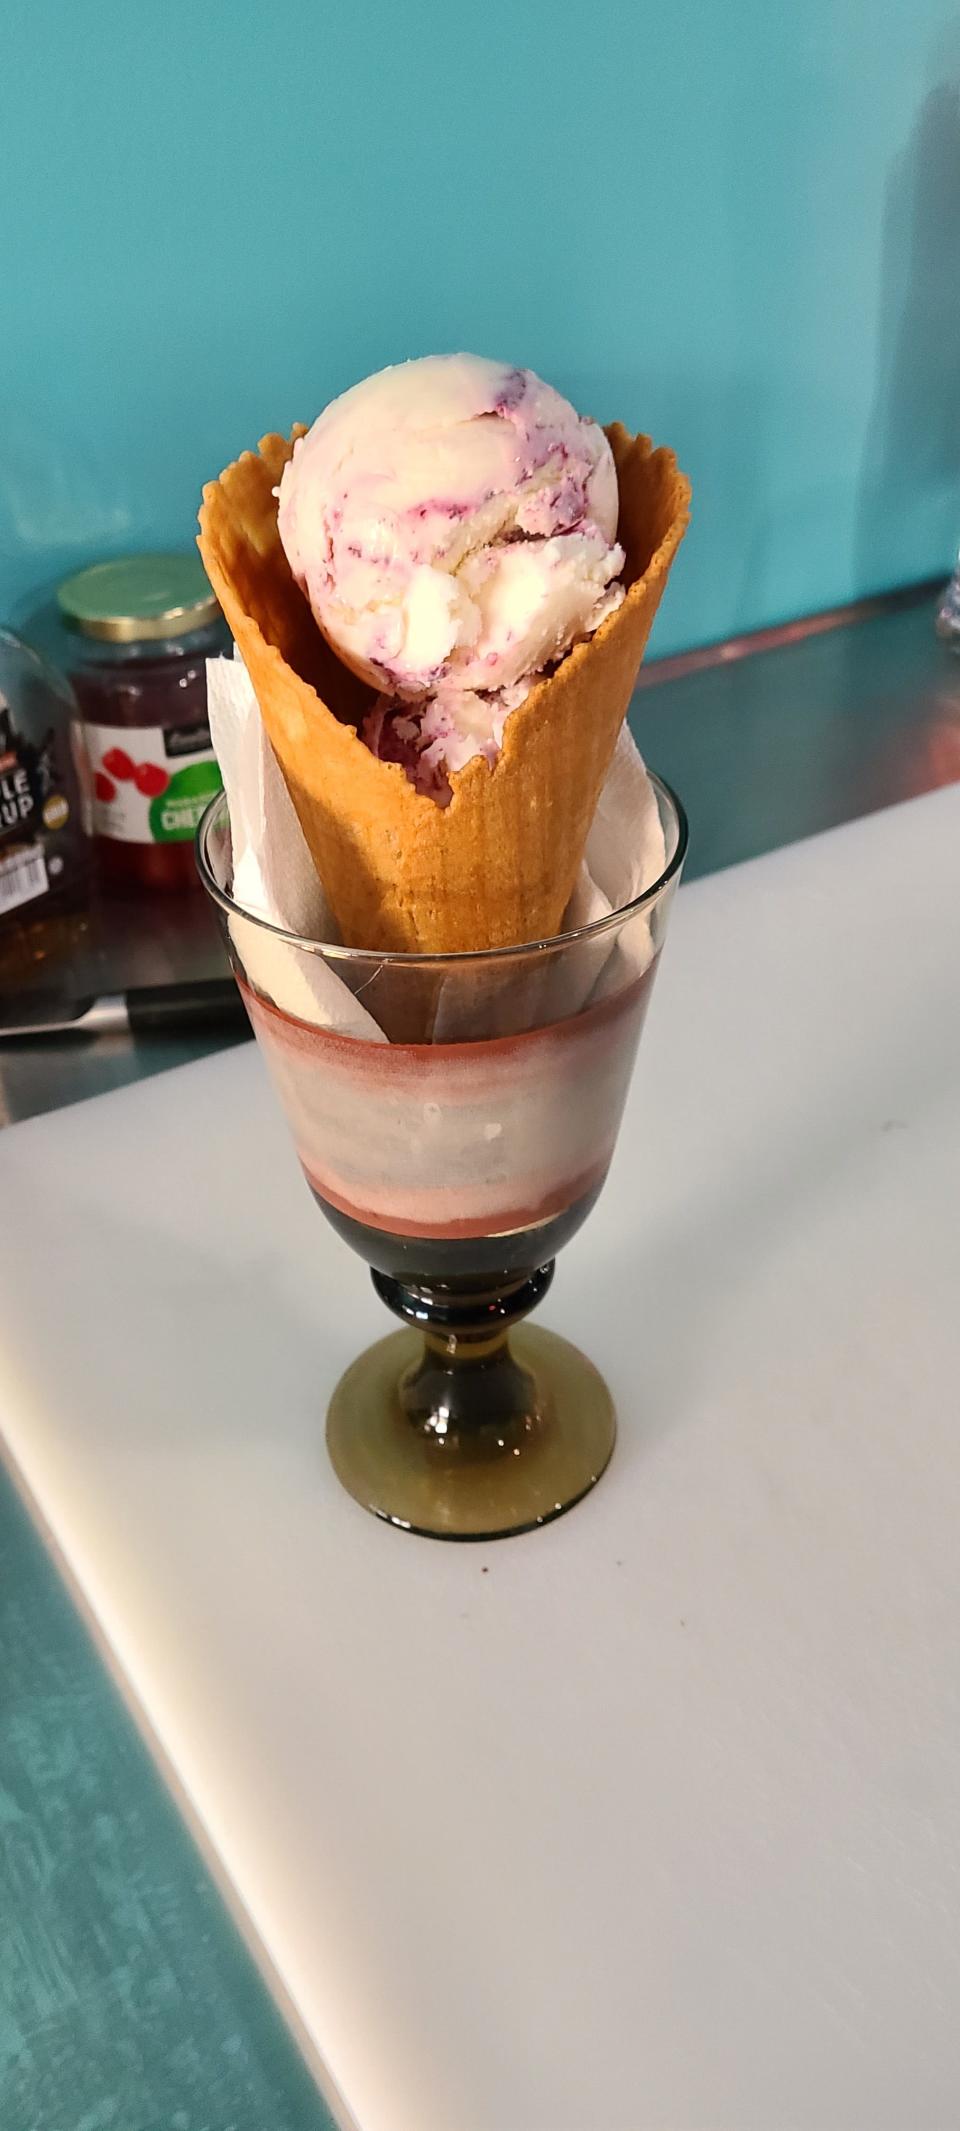 Fernweh Ice Cream's "Queen of Hearts" is made with fresh strawberries and from-scratch waffle cones.